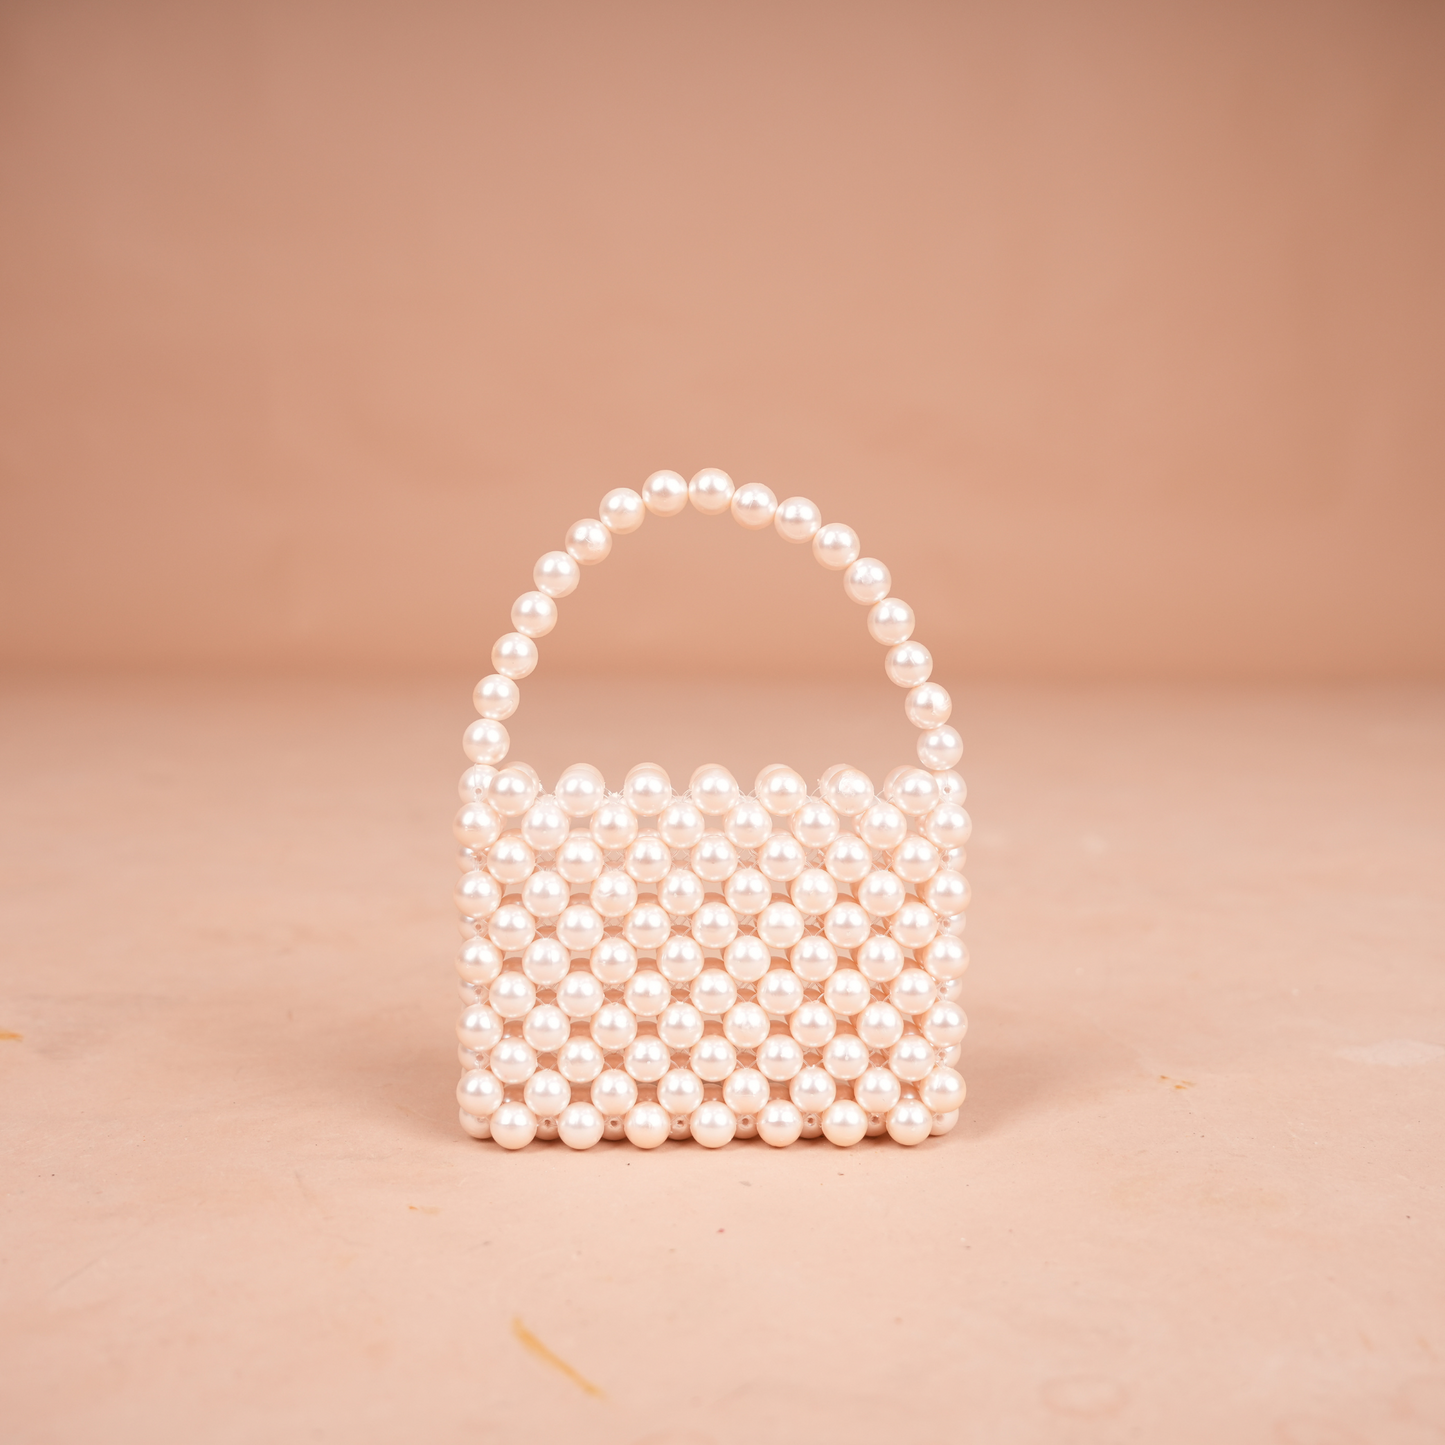 Cream Elegance: Pearl Mini Bag - Timeless Sophistication in Every Detail